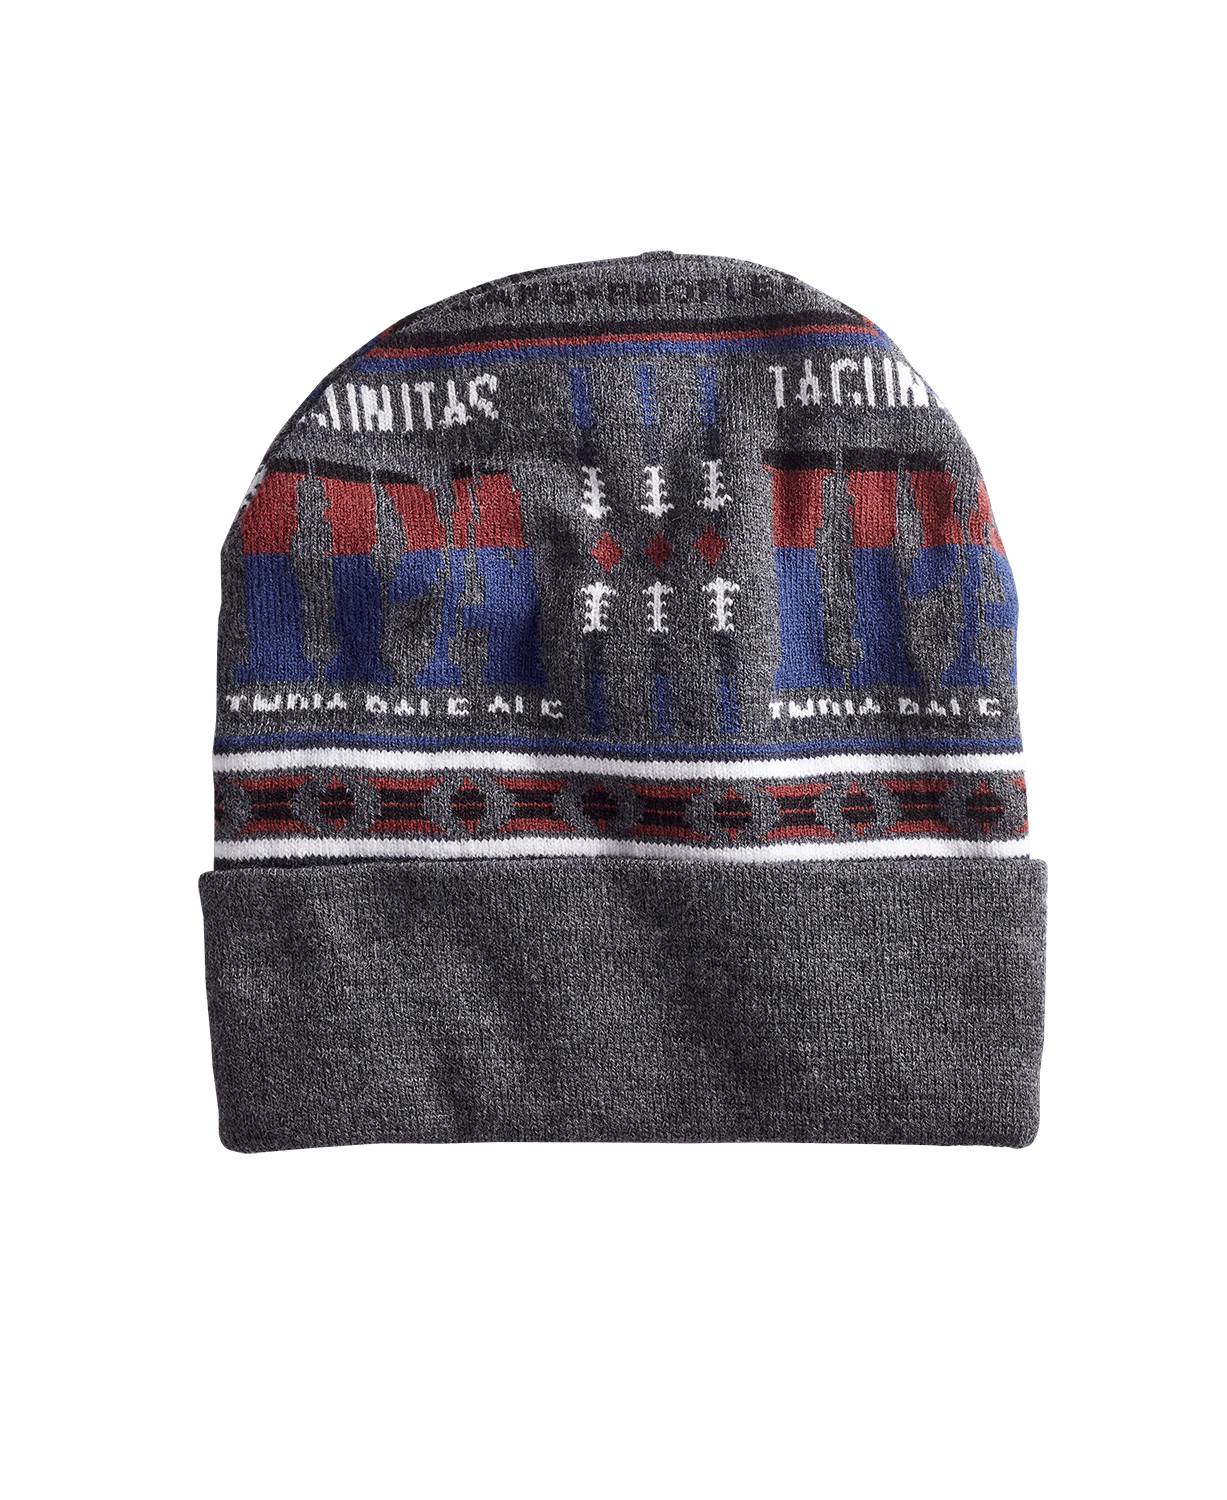 “A cozy and stylish craft beer-inspired winter headwear featuring a unique canyon print design. Made with premium quality material, it offers comfort and warmth. Perfect for beer enthusiasts and outdoor fashion.”